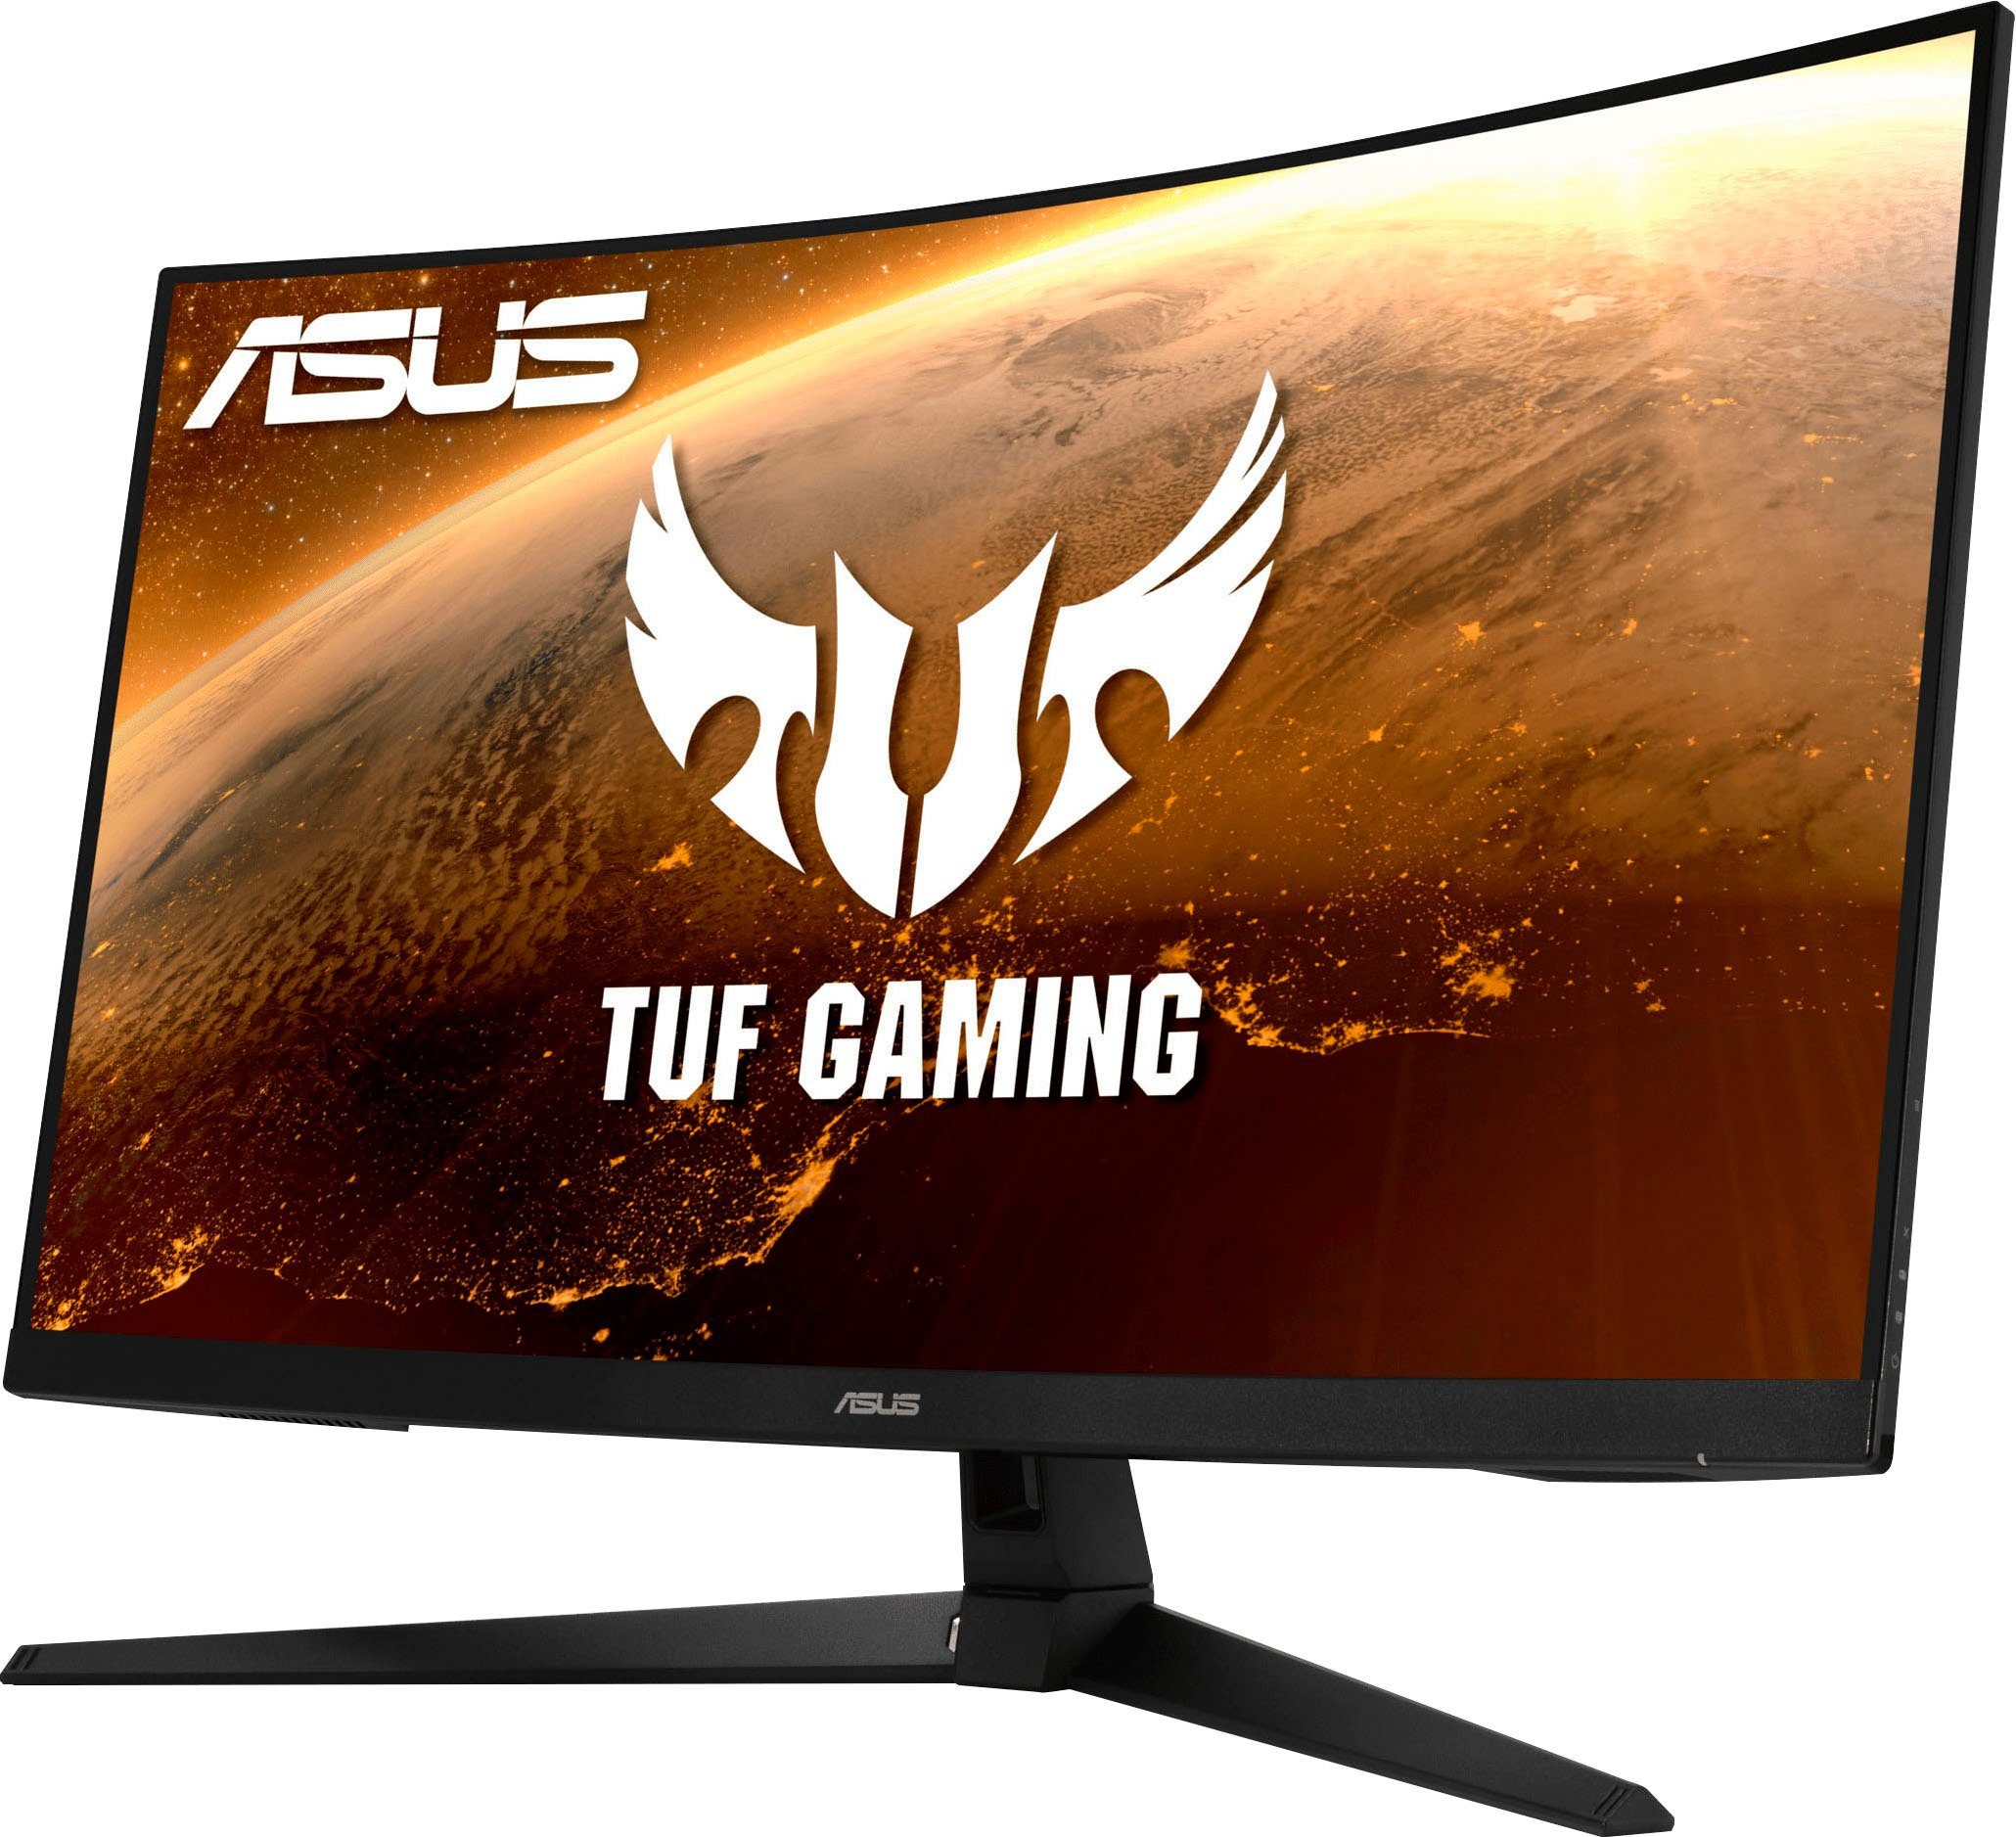 x 1 QHD, px, 165 (80 VG32VQ1BR Hz, Curved-Gaming-Monitor Reaktionszeit, 2560 cm/31,5 ", Asus 1440 LED) ms